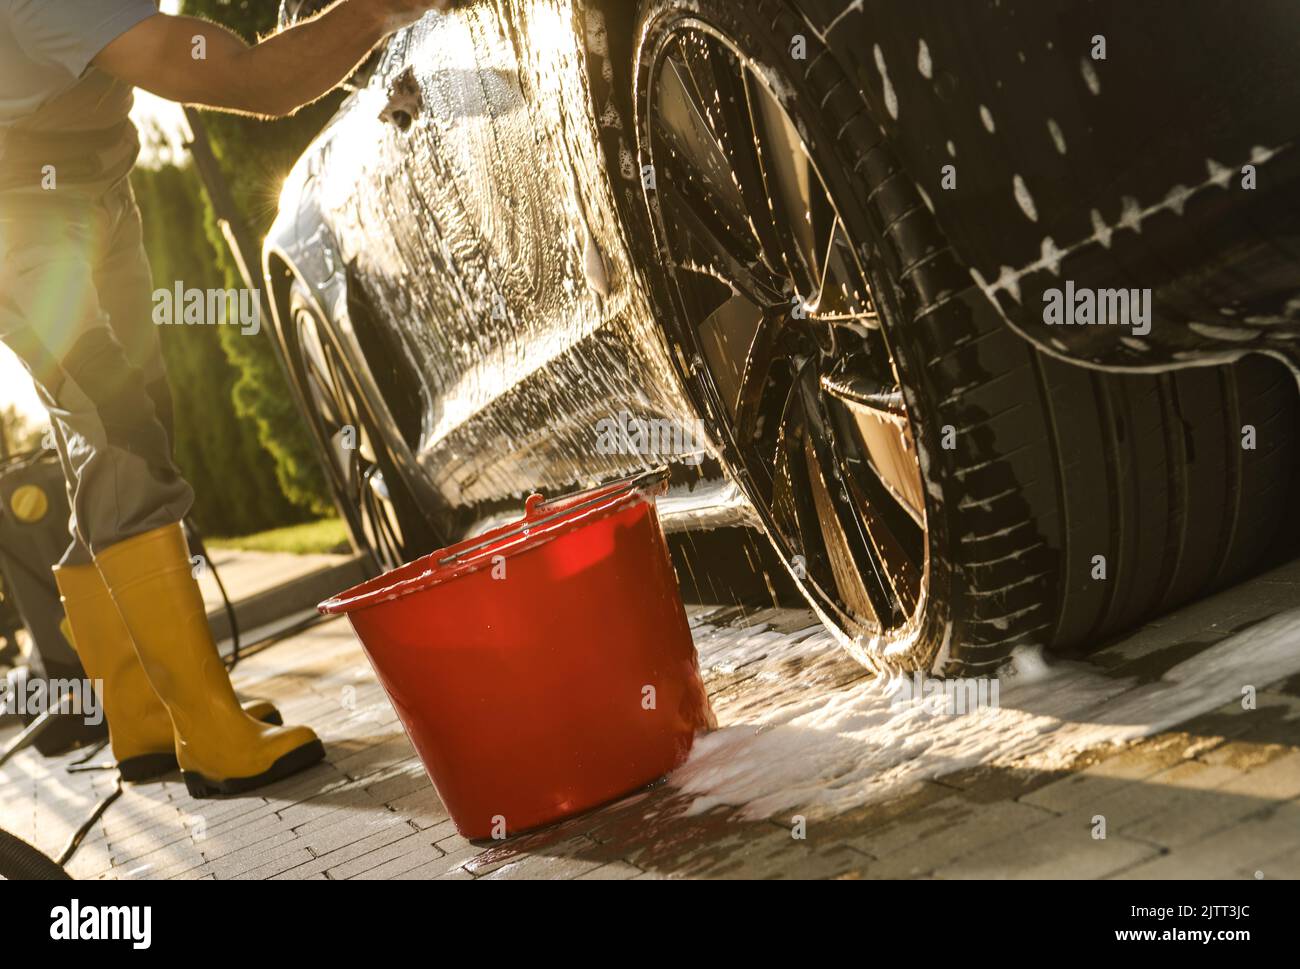 Caucasian Man in Yellow Rubber Boots Hand Washing Luxury Car on Sunny Summer Day. Red Bucket with Washing Liquid Standing Next to Rear Wheel. Vehicle Stock Photo